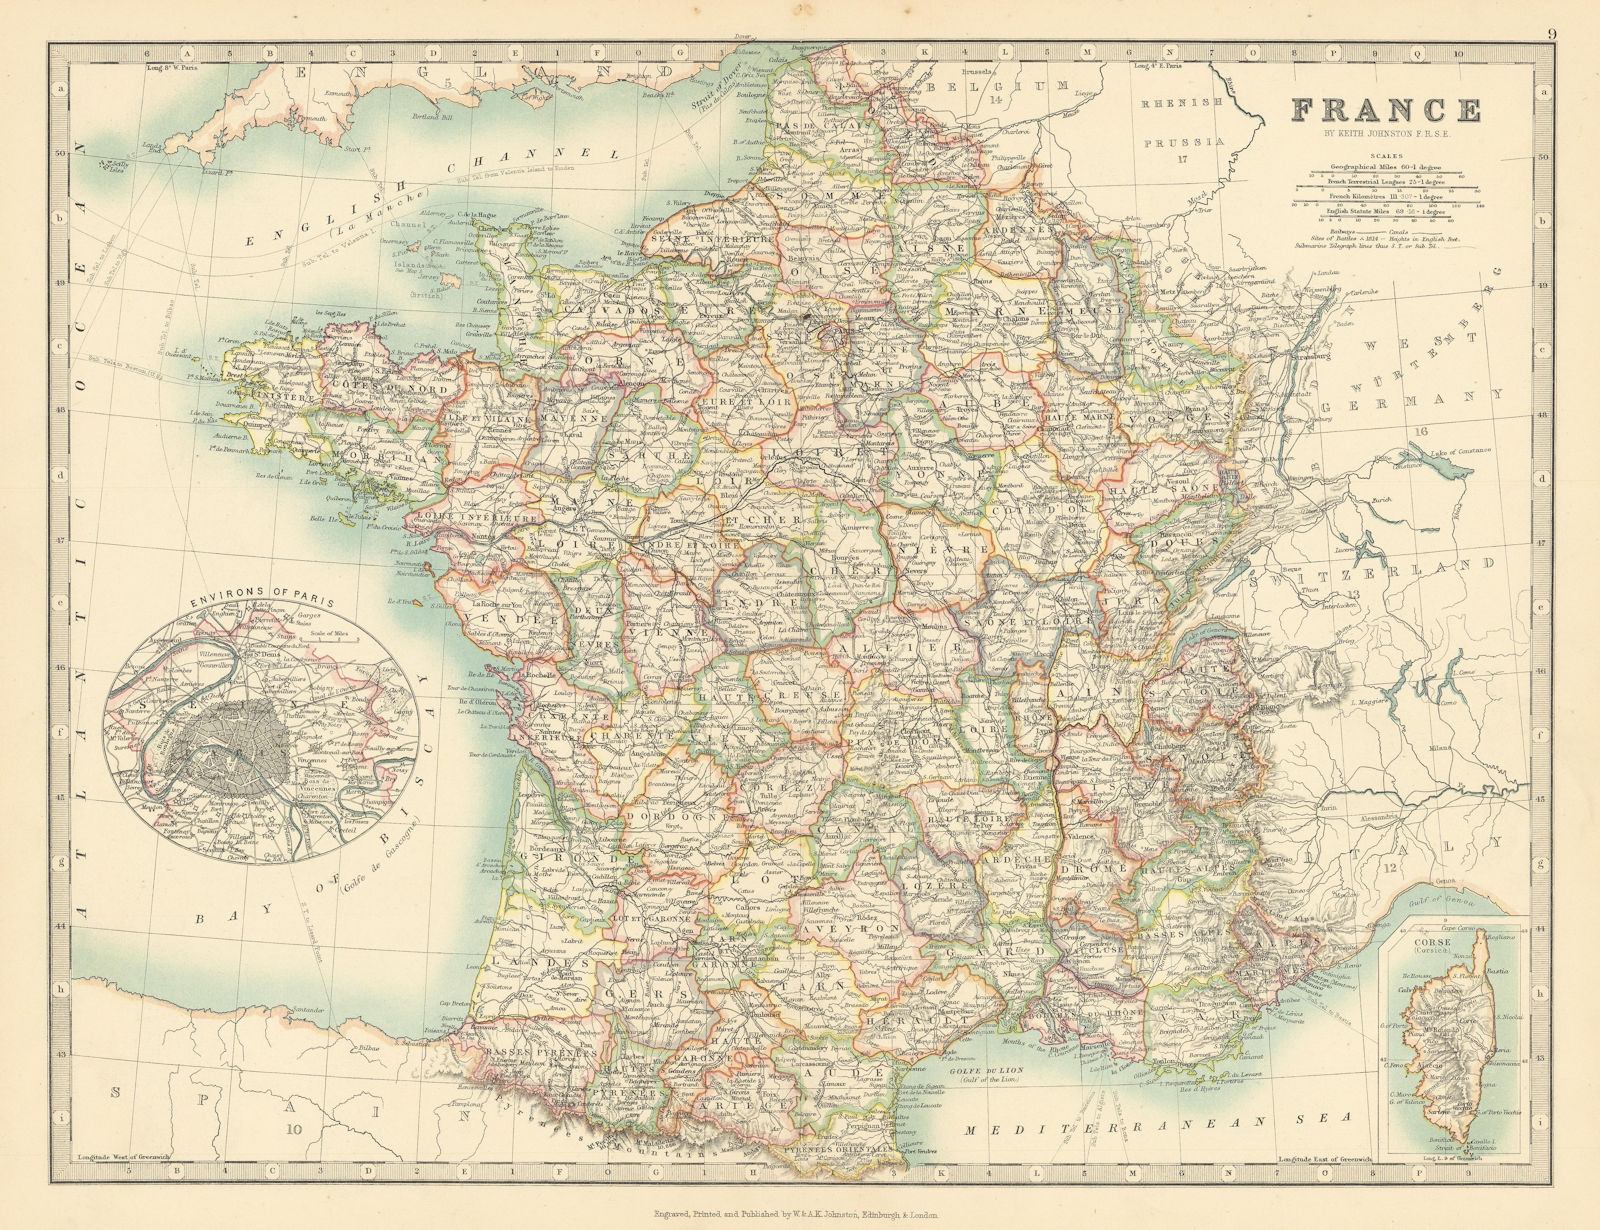 Associate Product FRANCE In departements Railways canals JOHNSTON 1897 old antique map chart